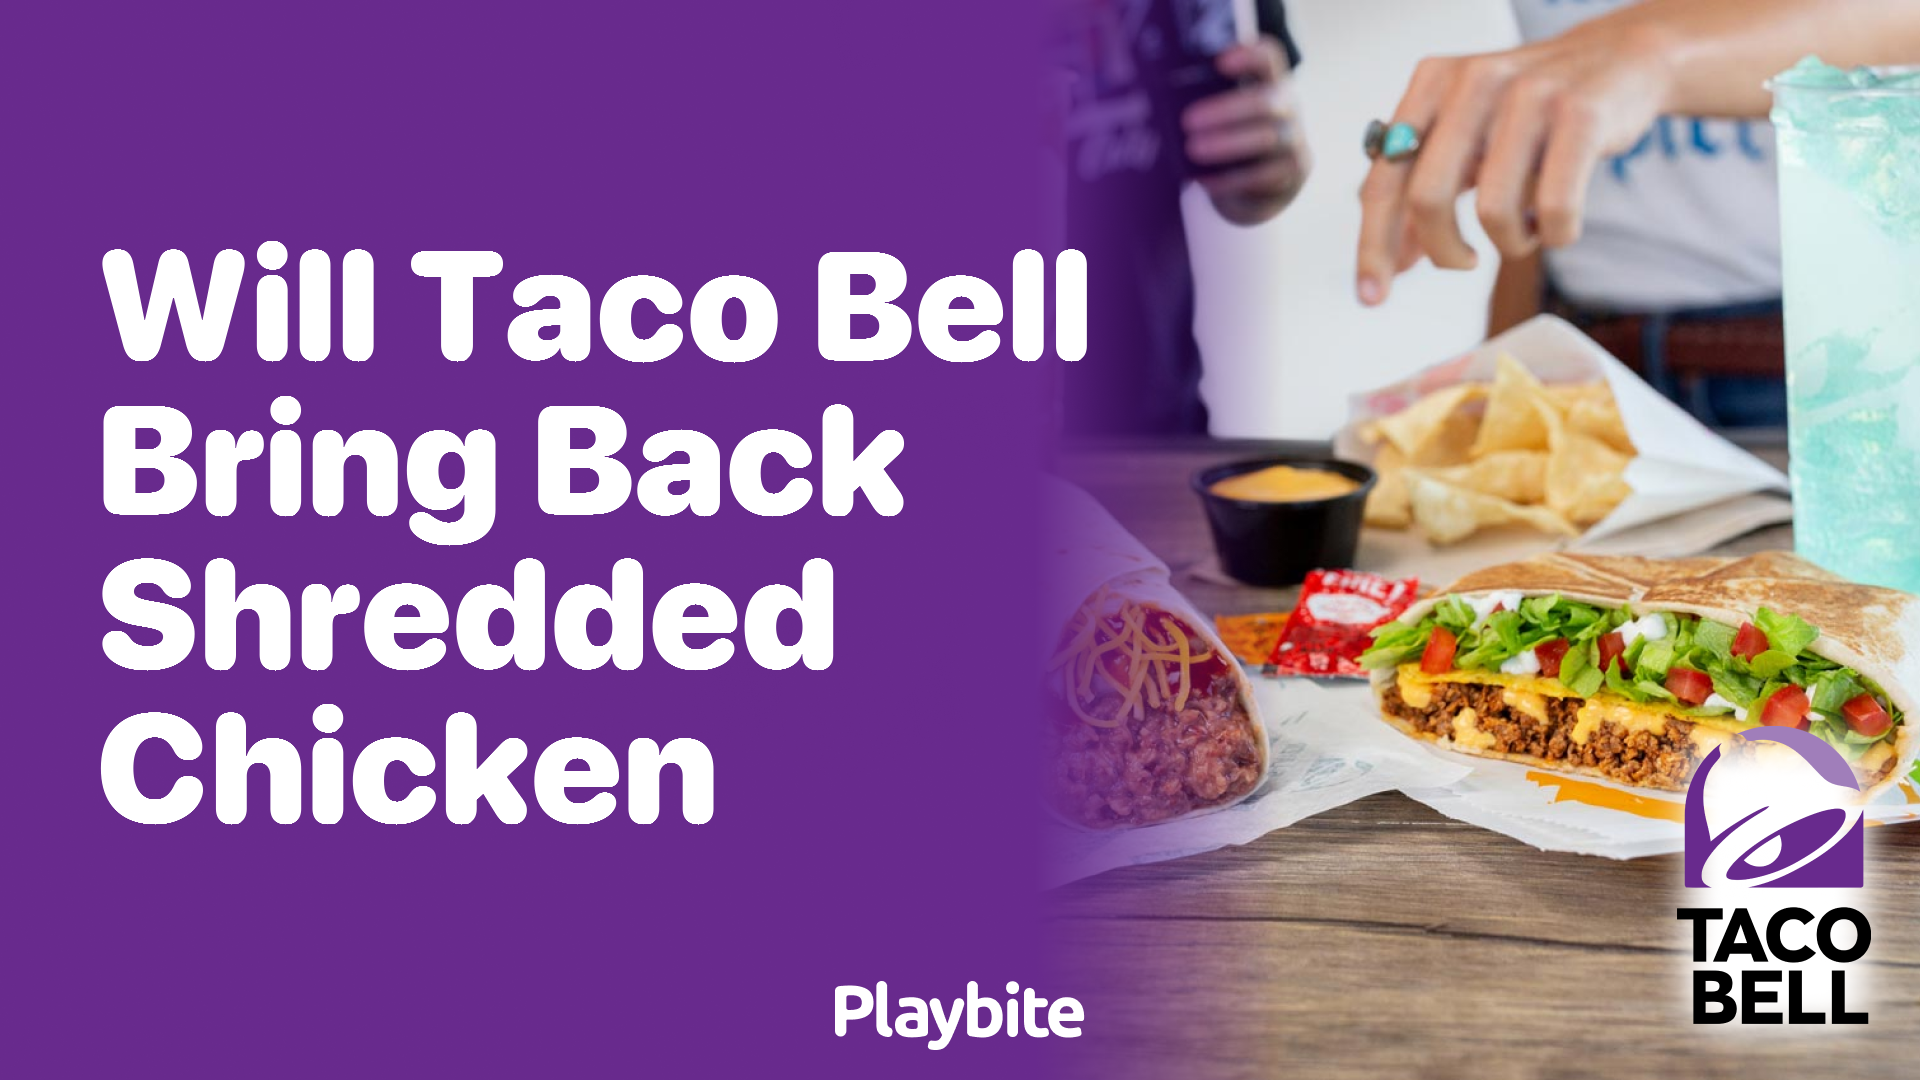 Will Taco Bell Bring Back Shredded Chicken? Find Out Here!